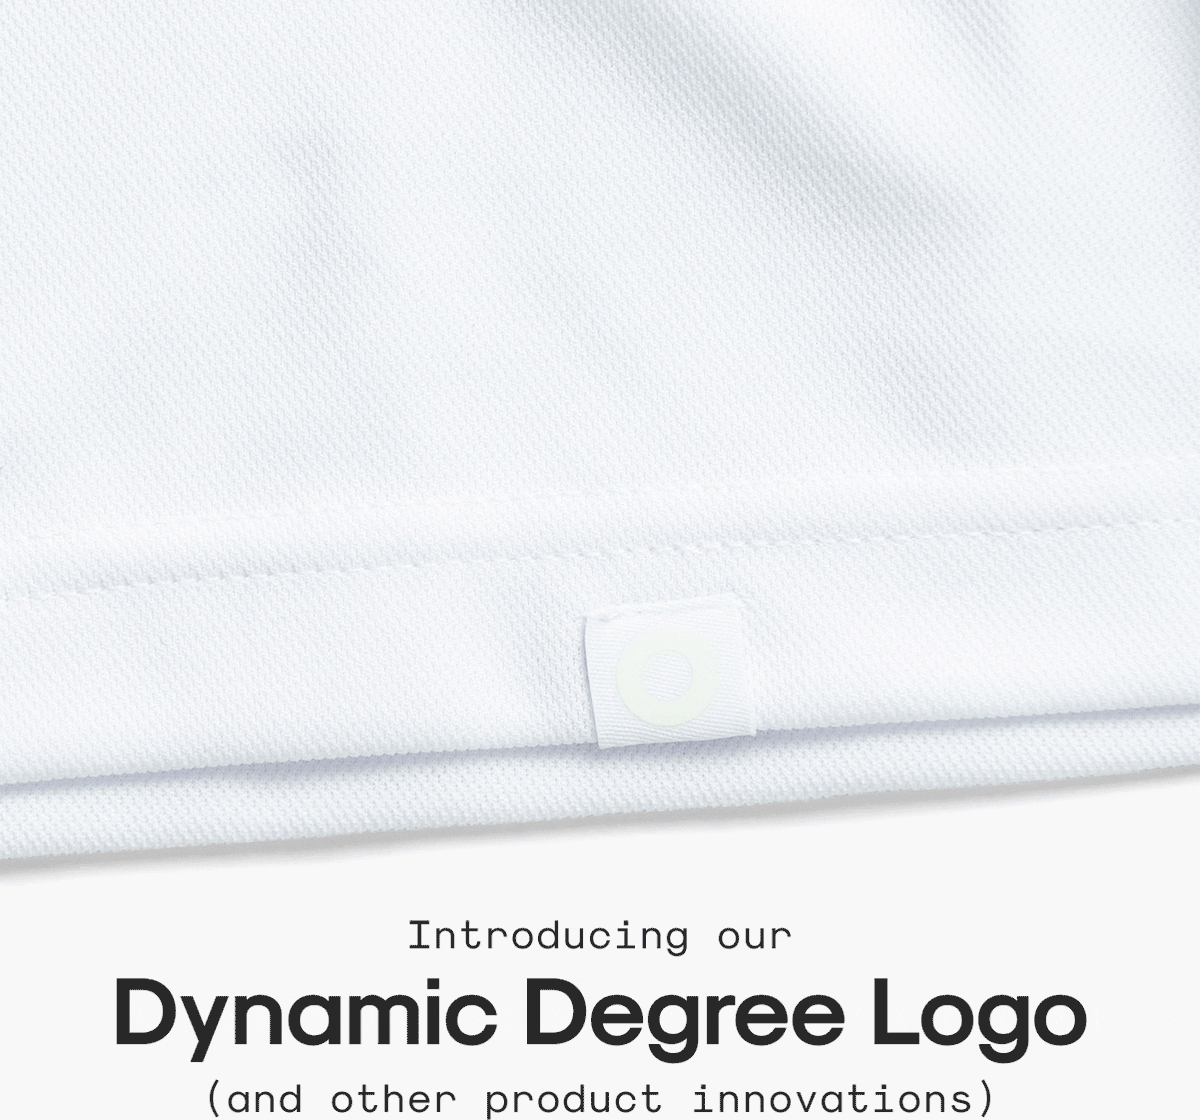 Introducing our Dynamic Degree Logo and other product innovations